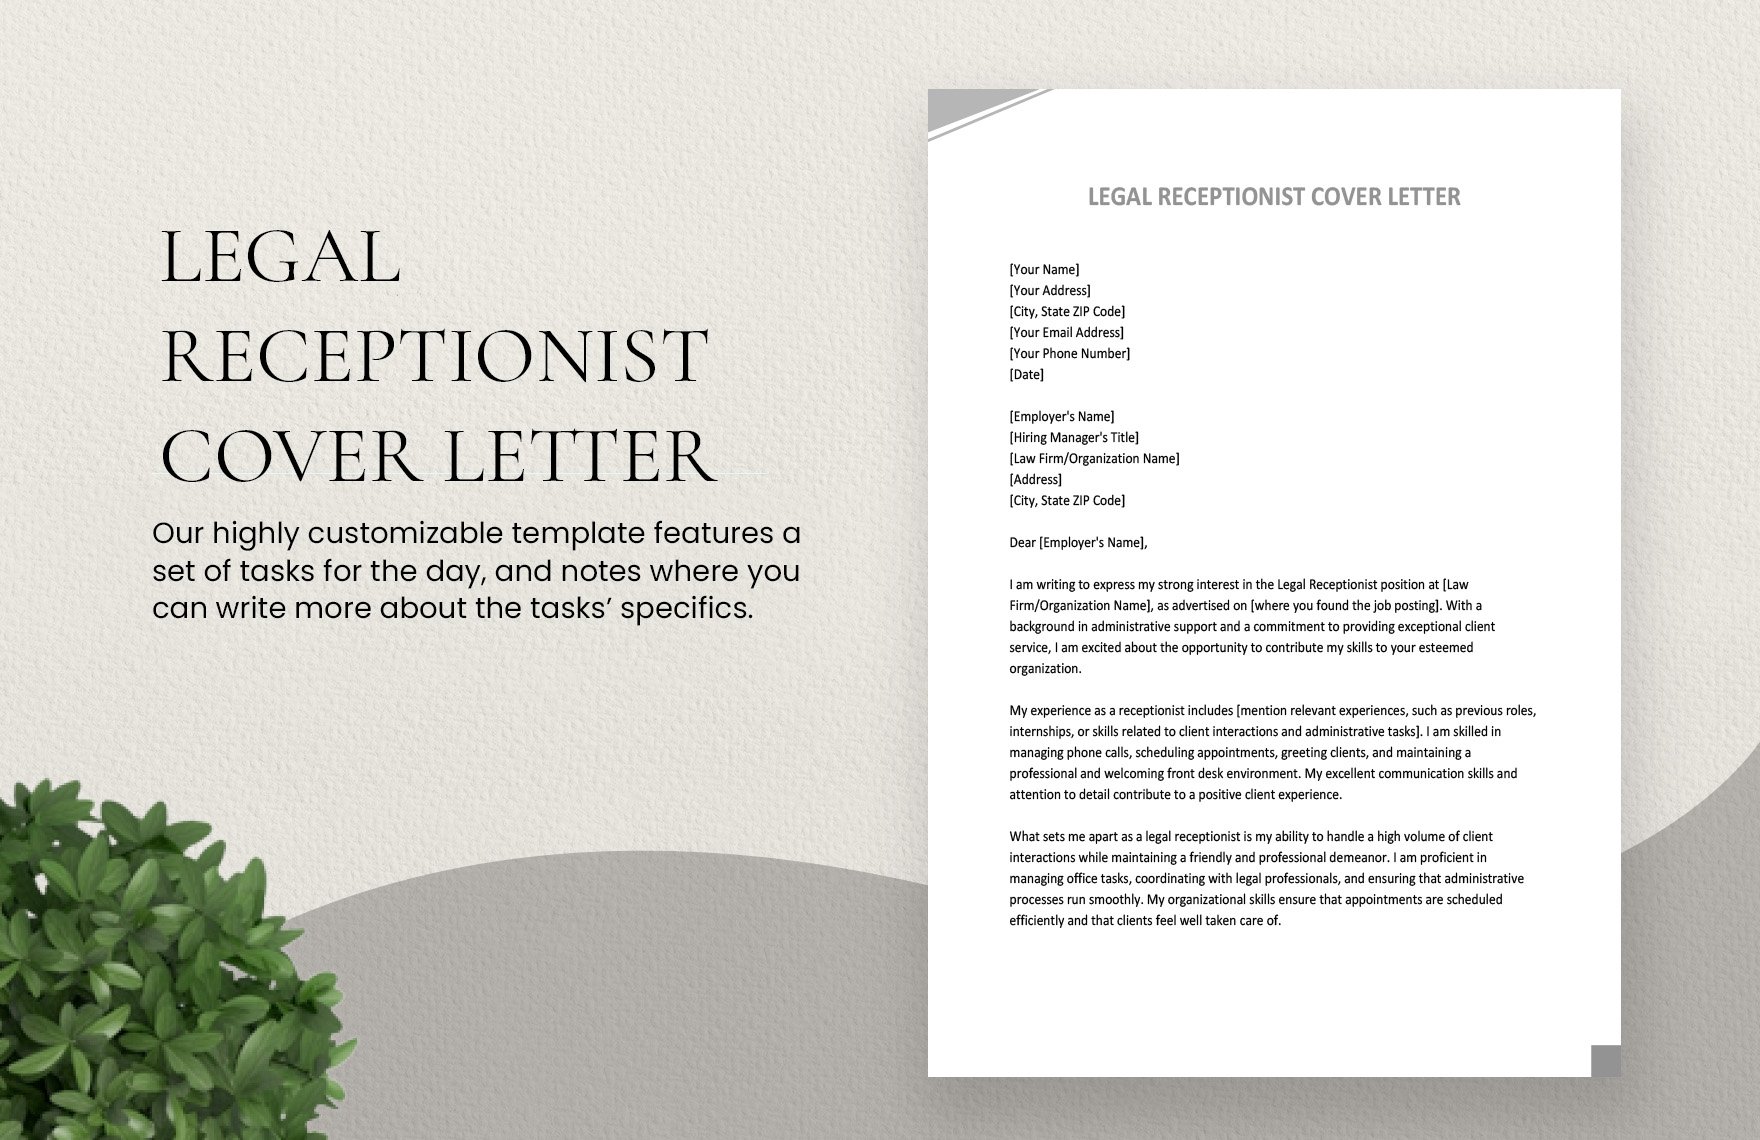 Legal Receptionist Cover Letter in Word, Google Docs